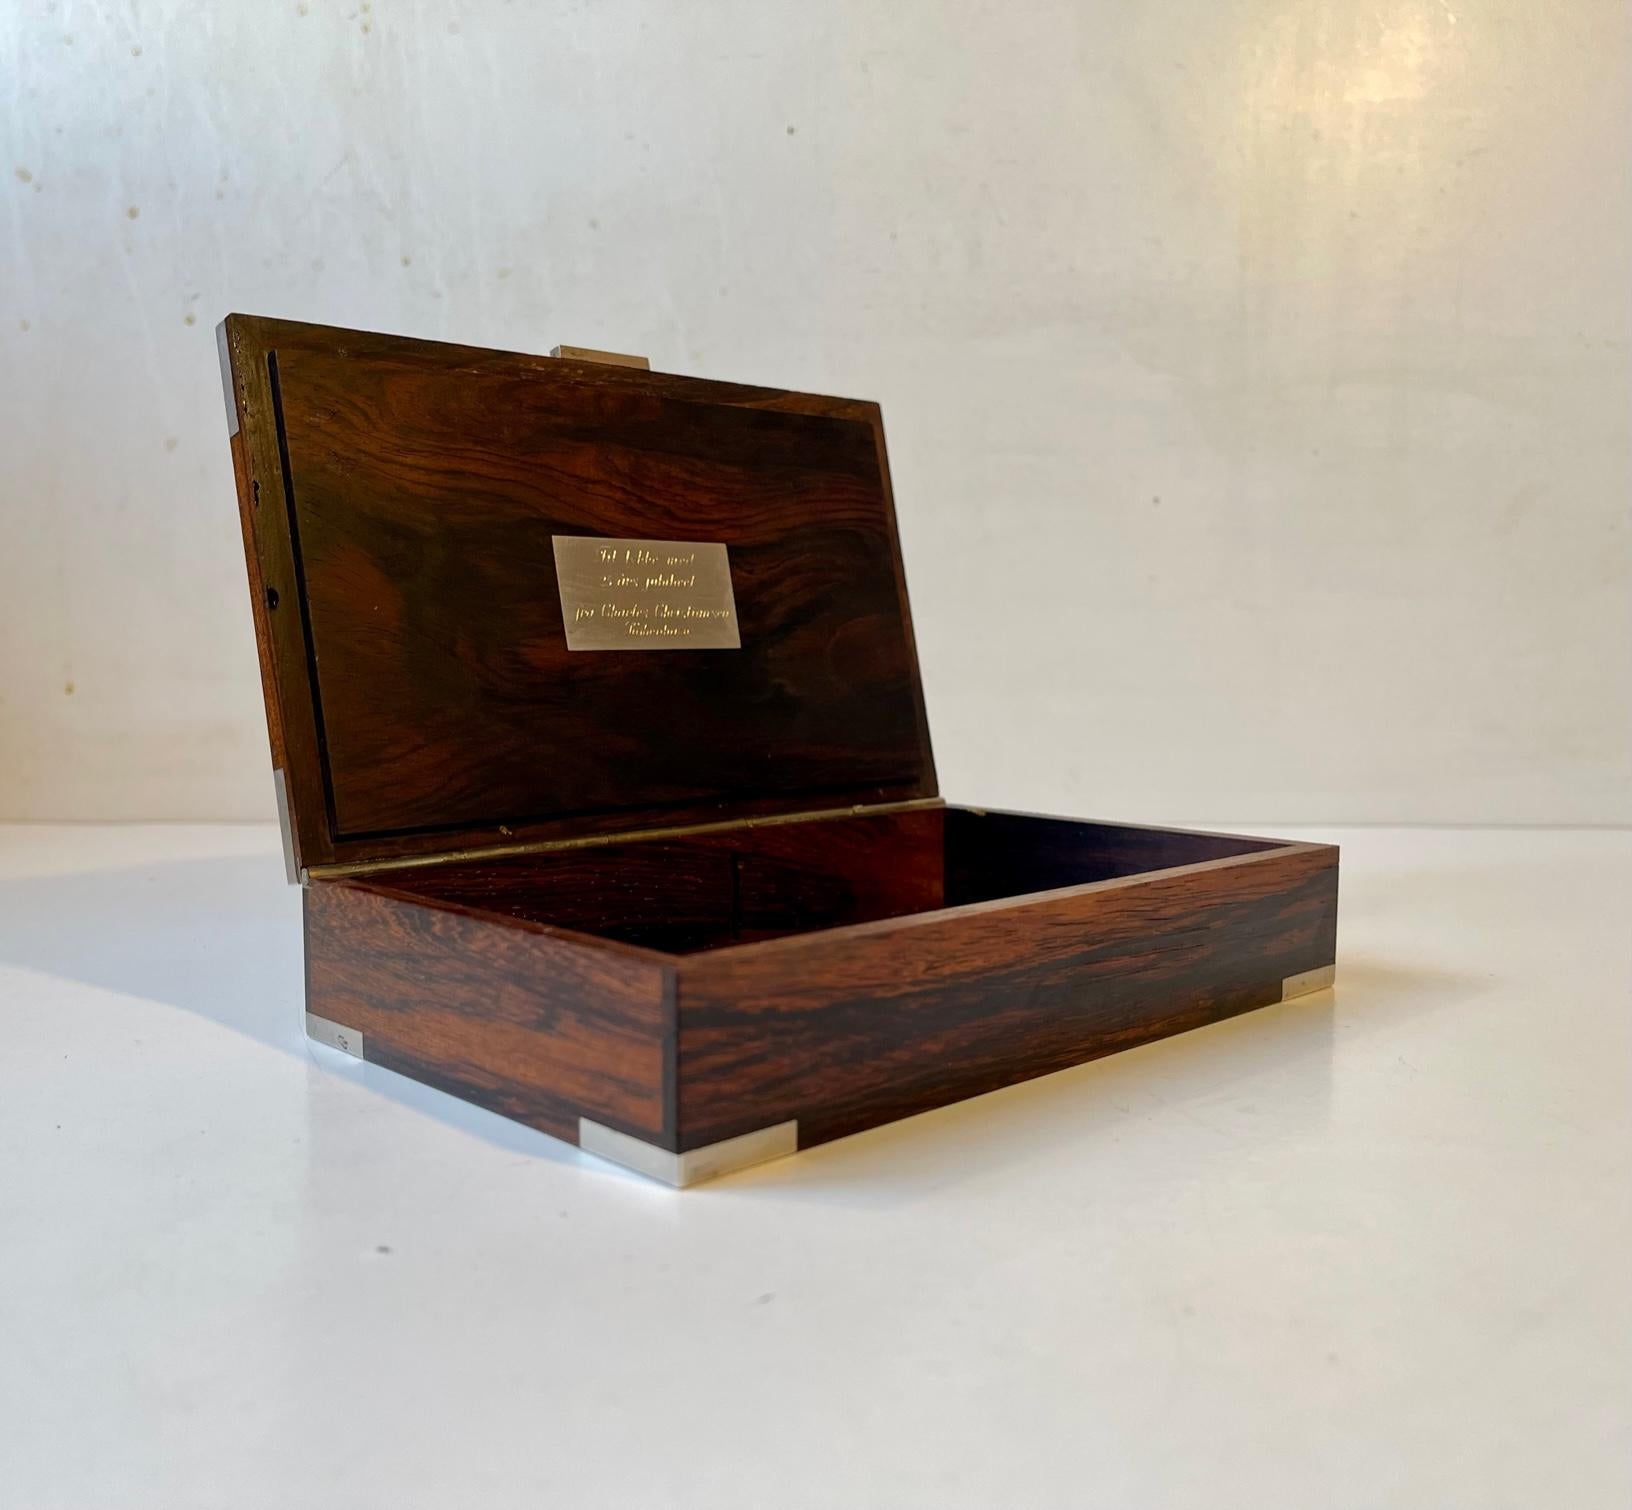 Hans Hansen Danish Modern Cigar Box in Rosewood and Sterling Silver, 1950s For Sale 5